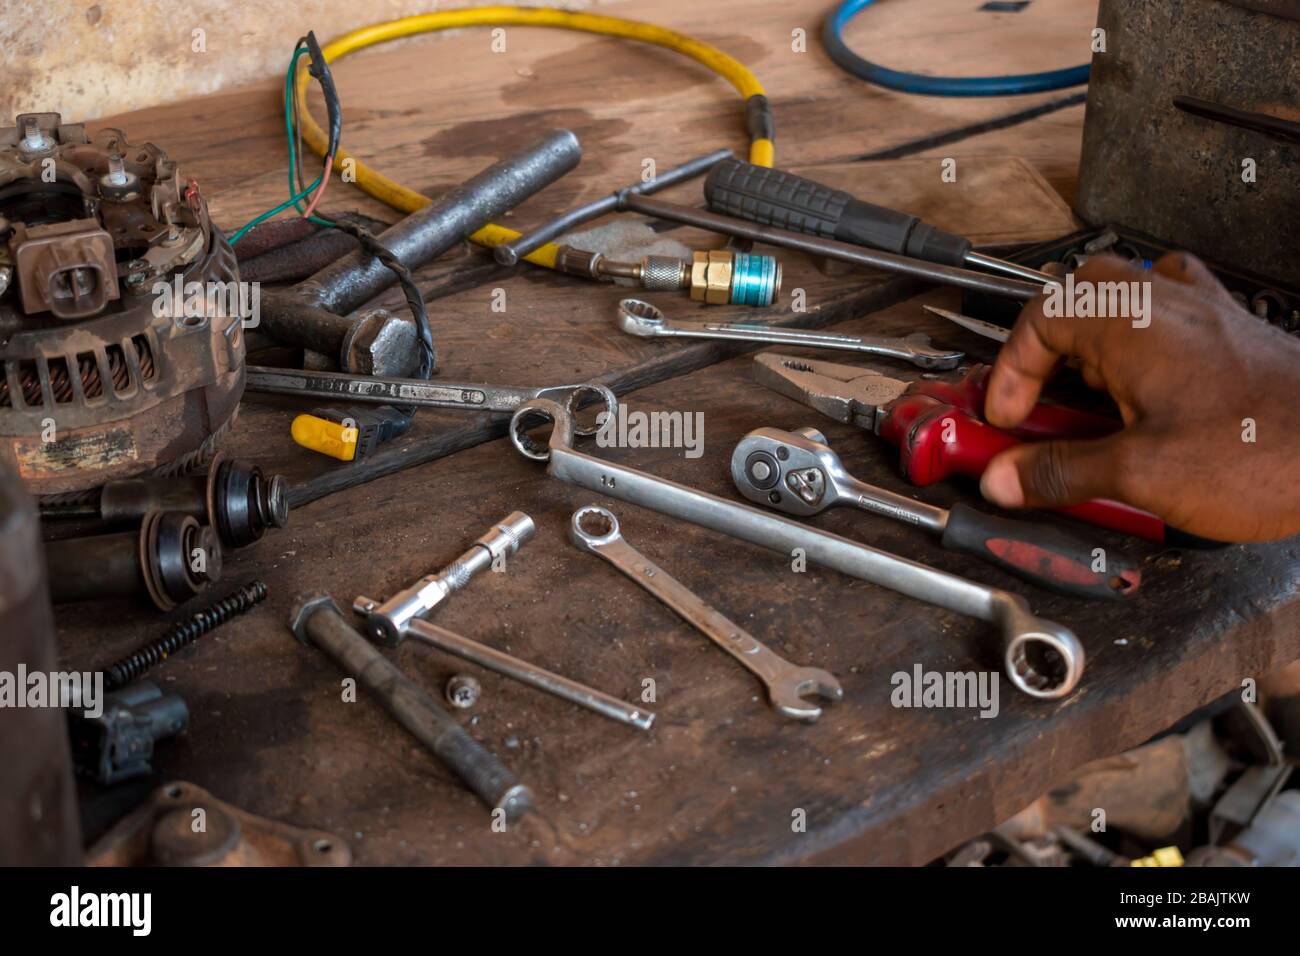 hand screwdriver spanner and tools on a mechanical table Stock Photo